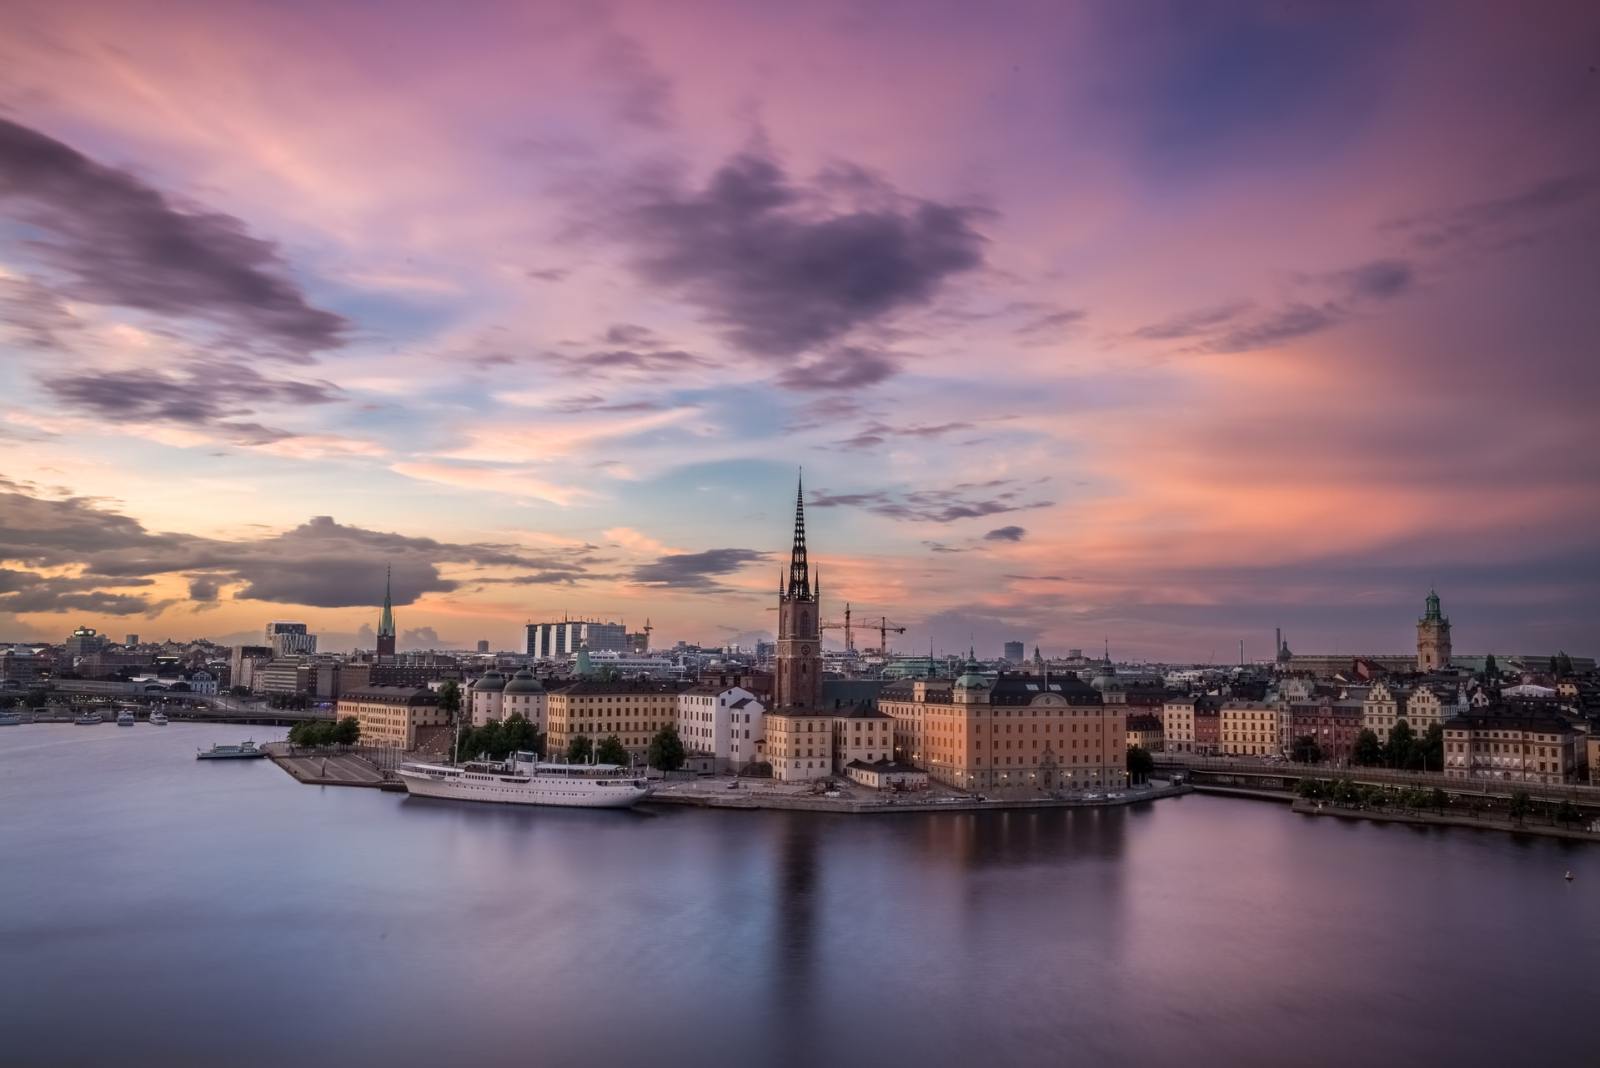 Unfortunately, Most People Will Struggle to Locate These Countries — Can You Get 17/25? Stockholm, Sweden